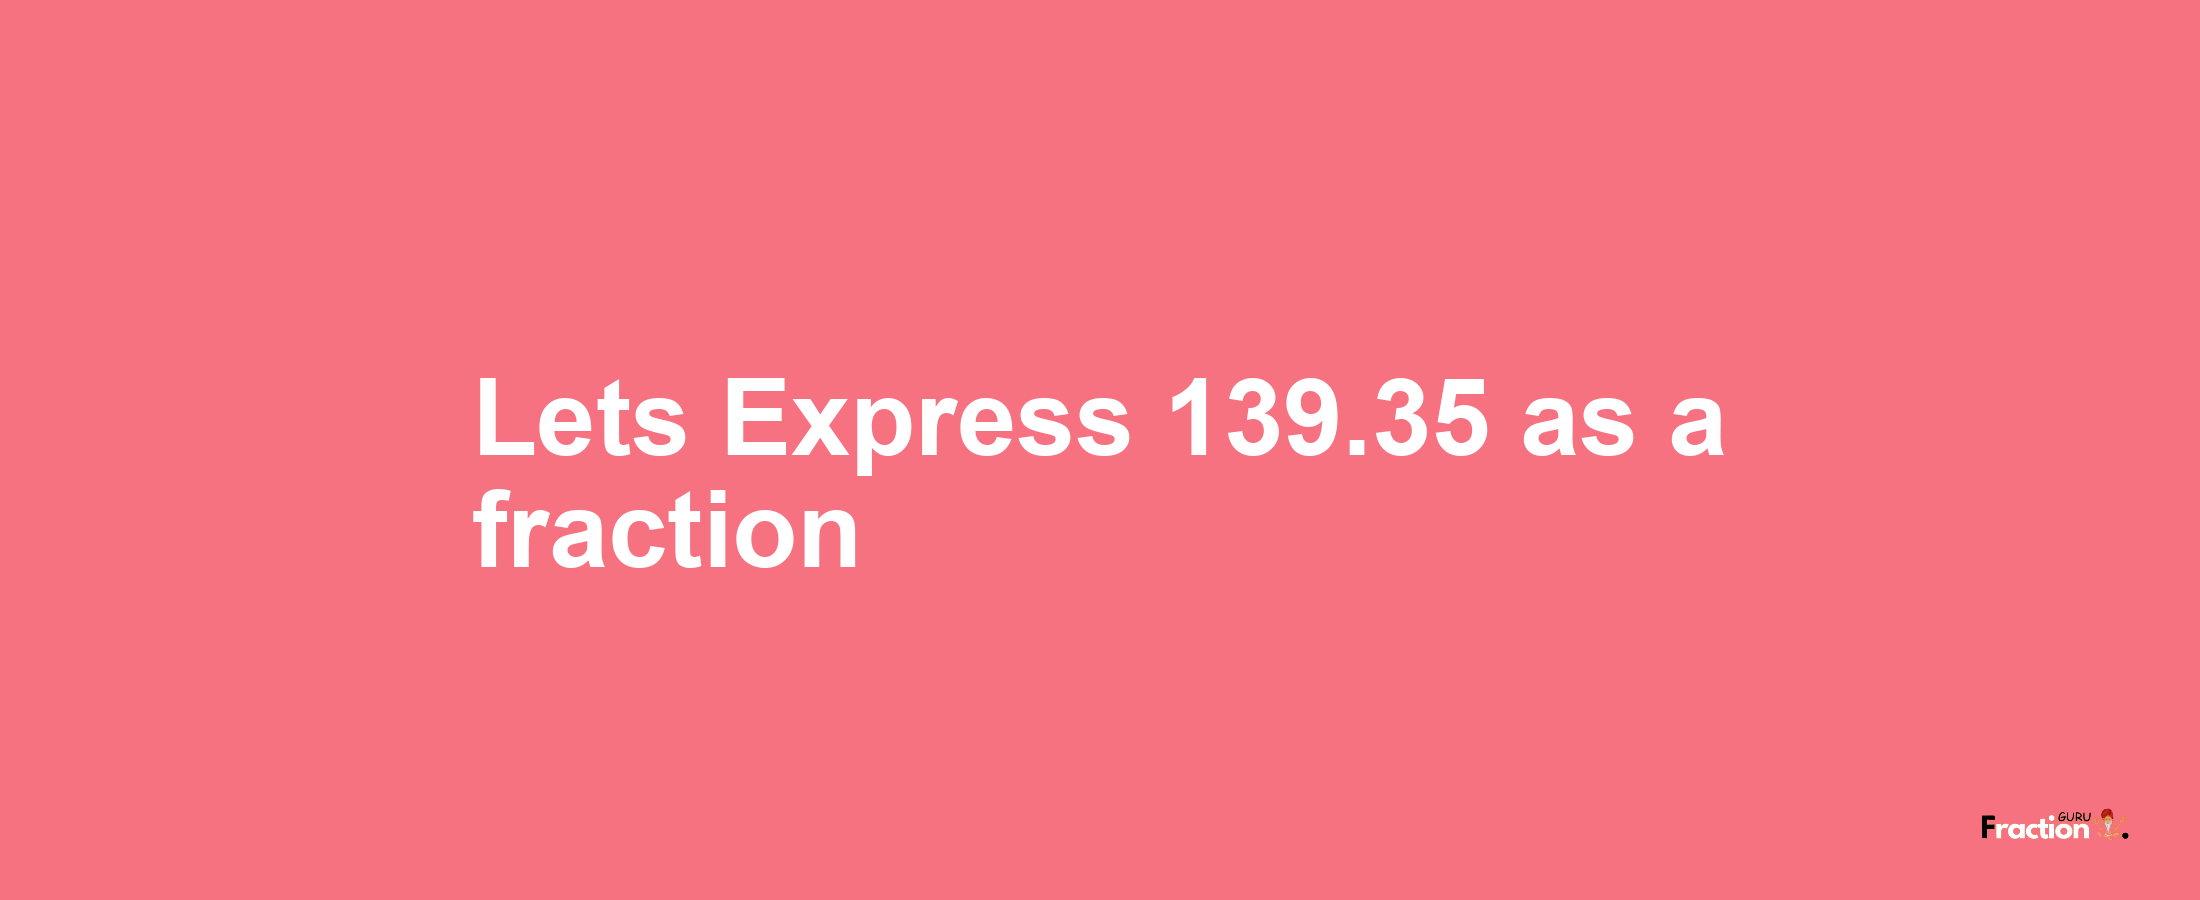 Lets Express 139.35 as afraction